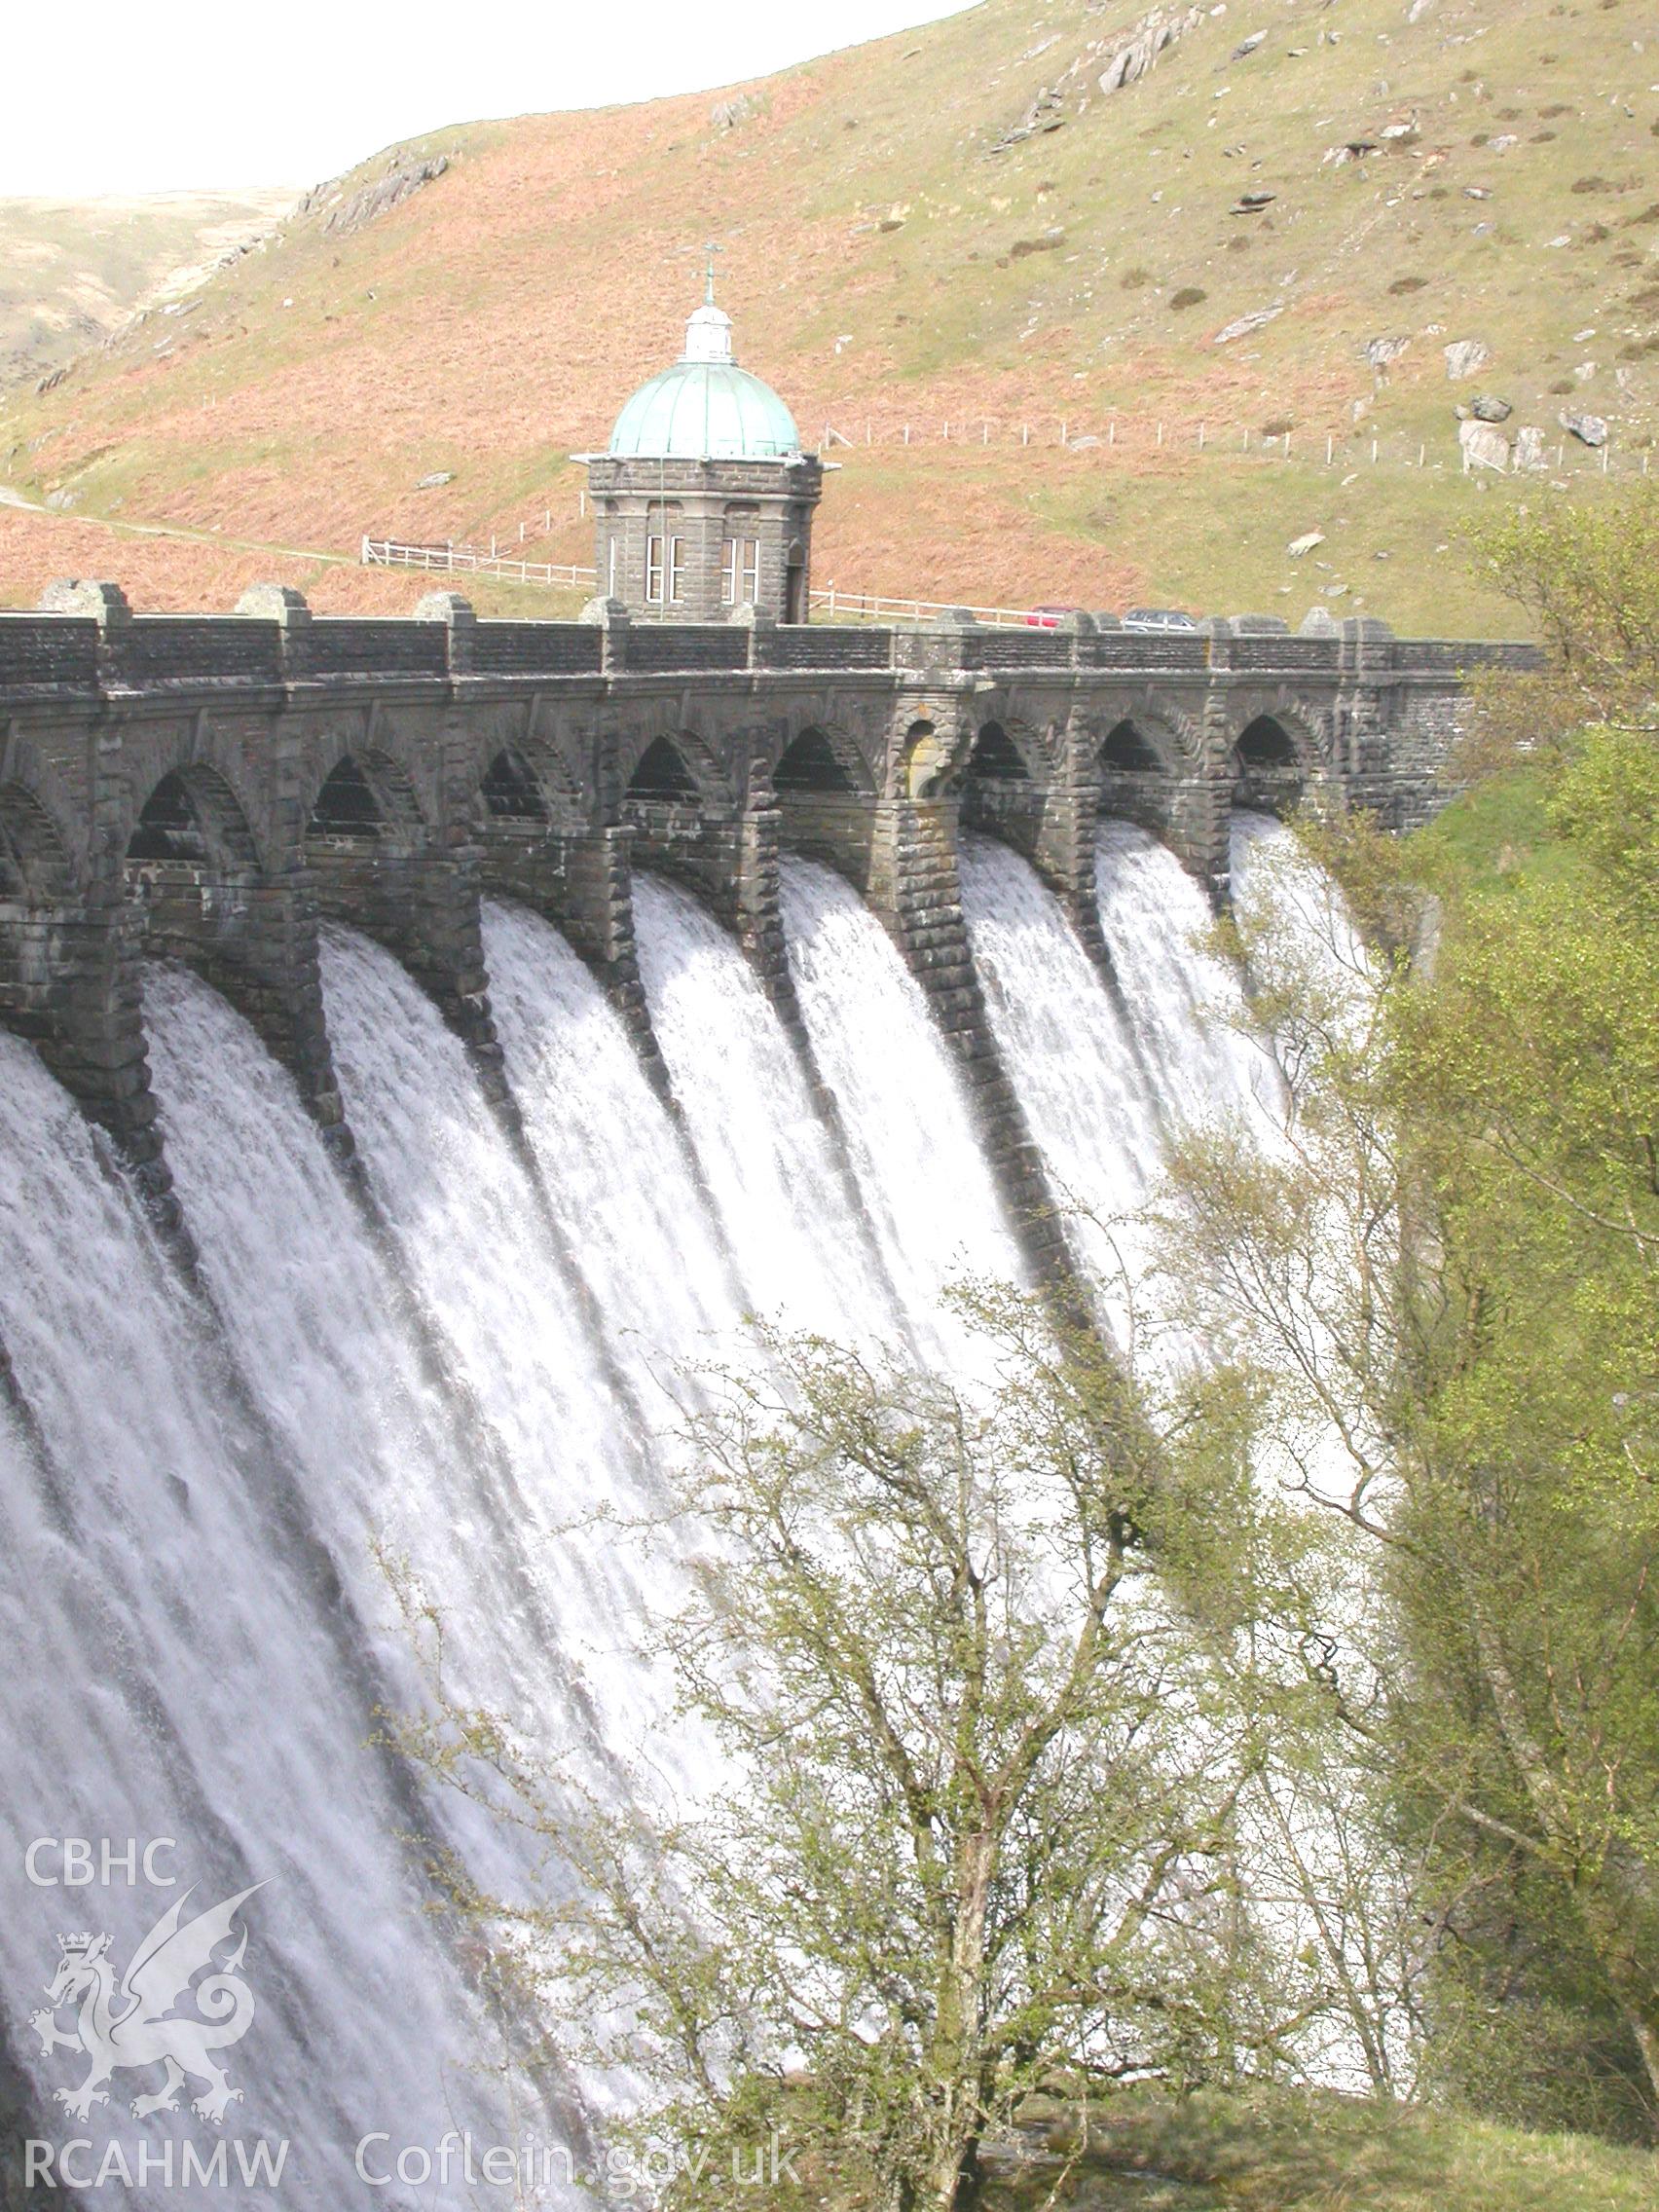 Dam face and valve tower from the south-west.